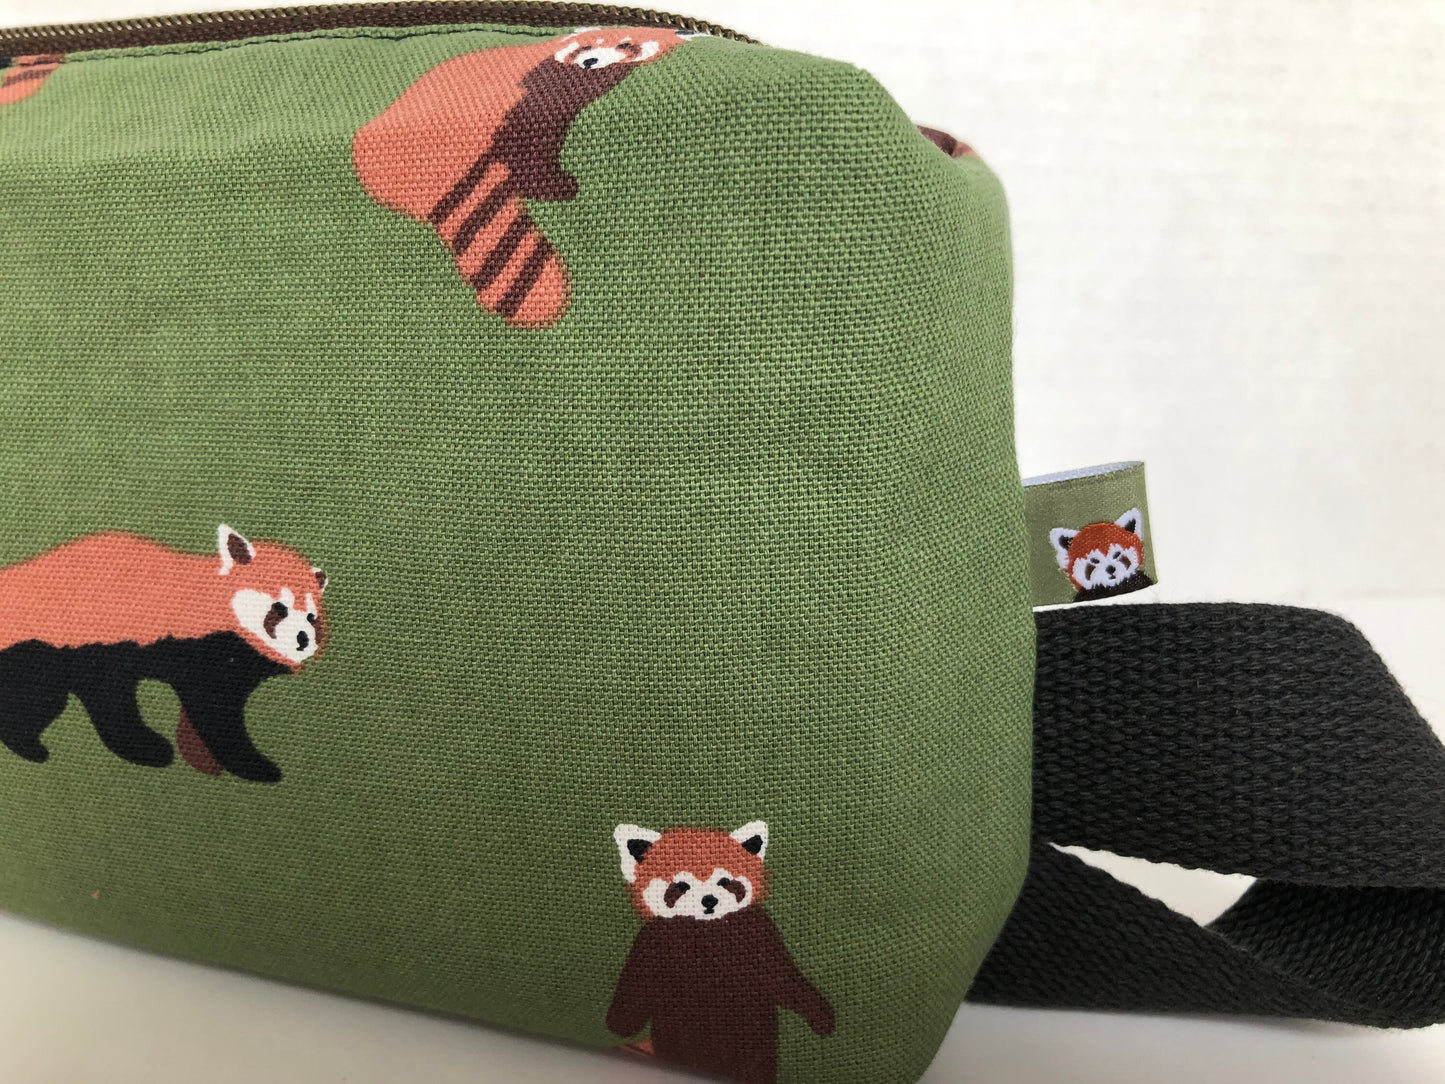 Red Panda Boxy Pouch, Gender Neutral Cosmetics Bag, Canvas Zipper Pouch